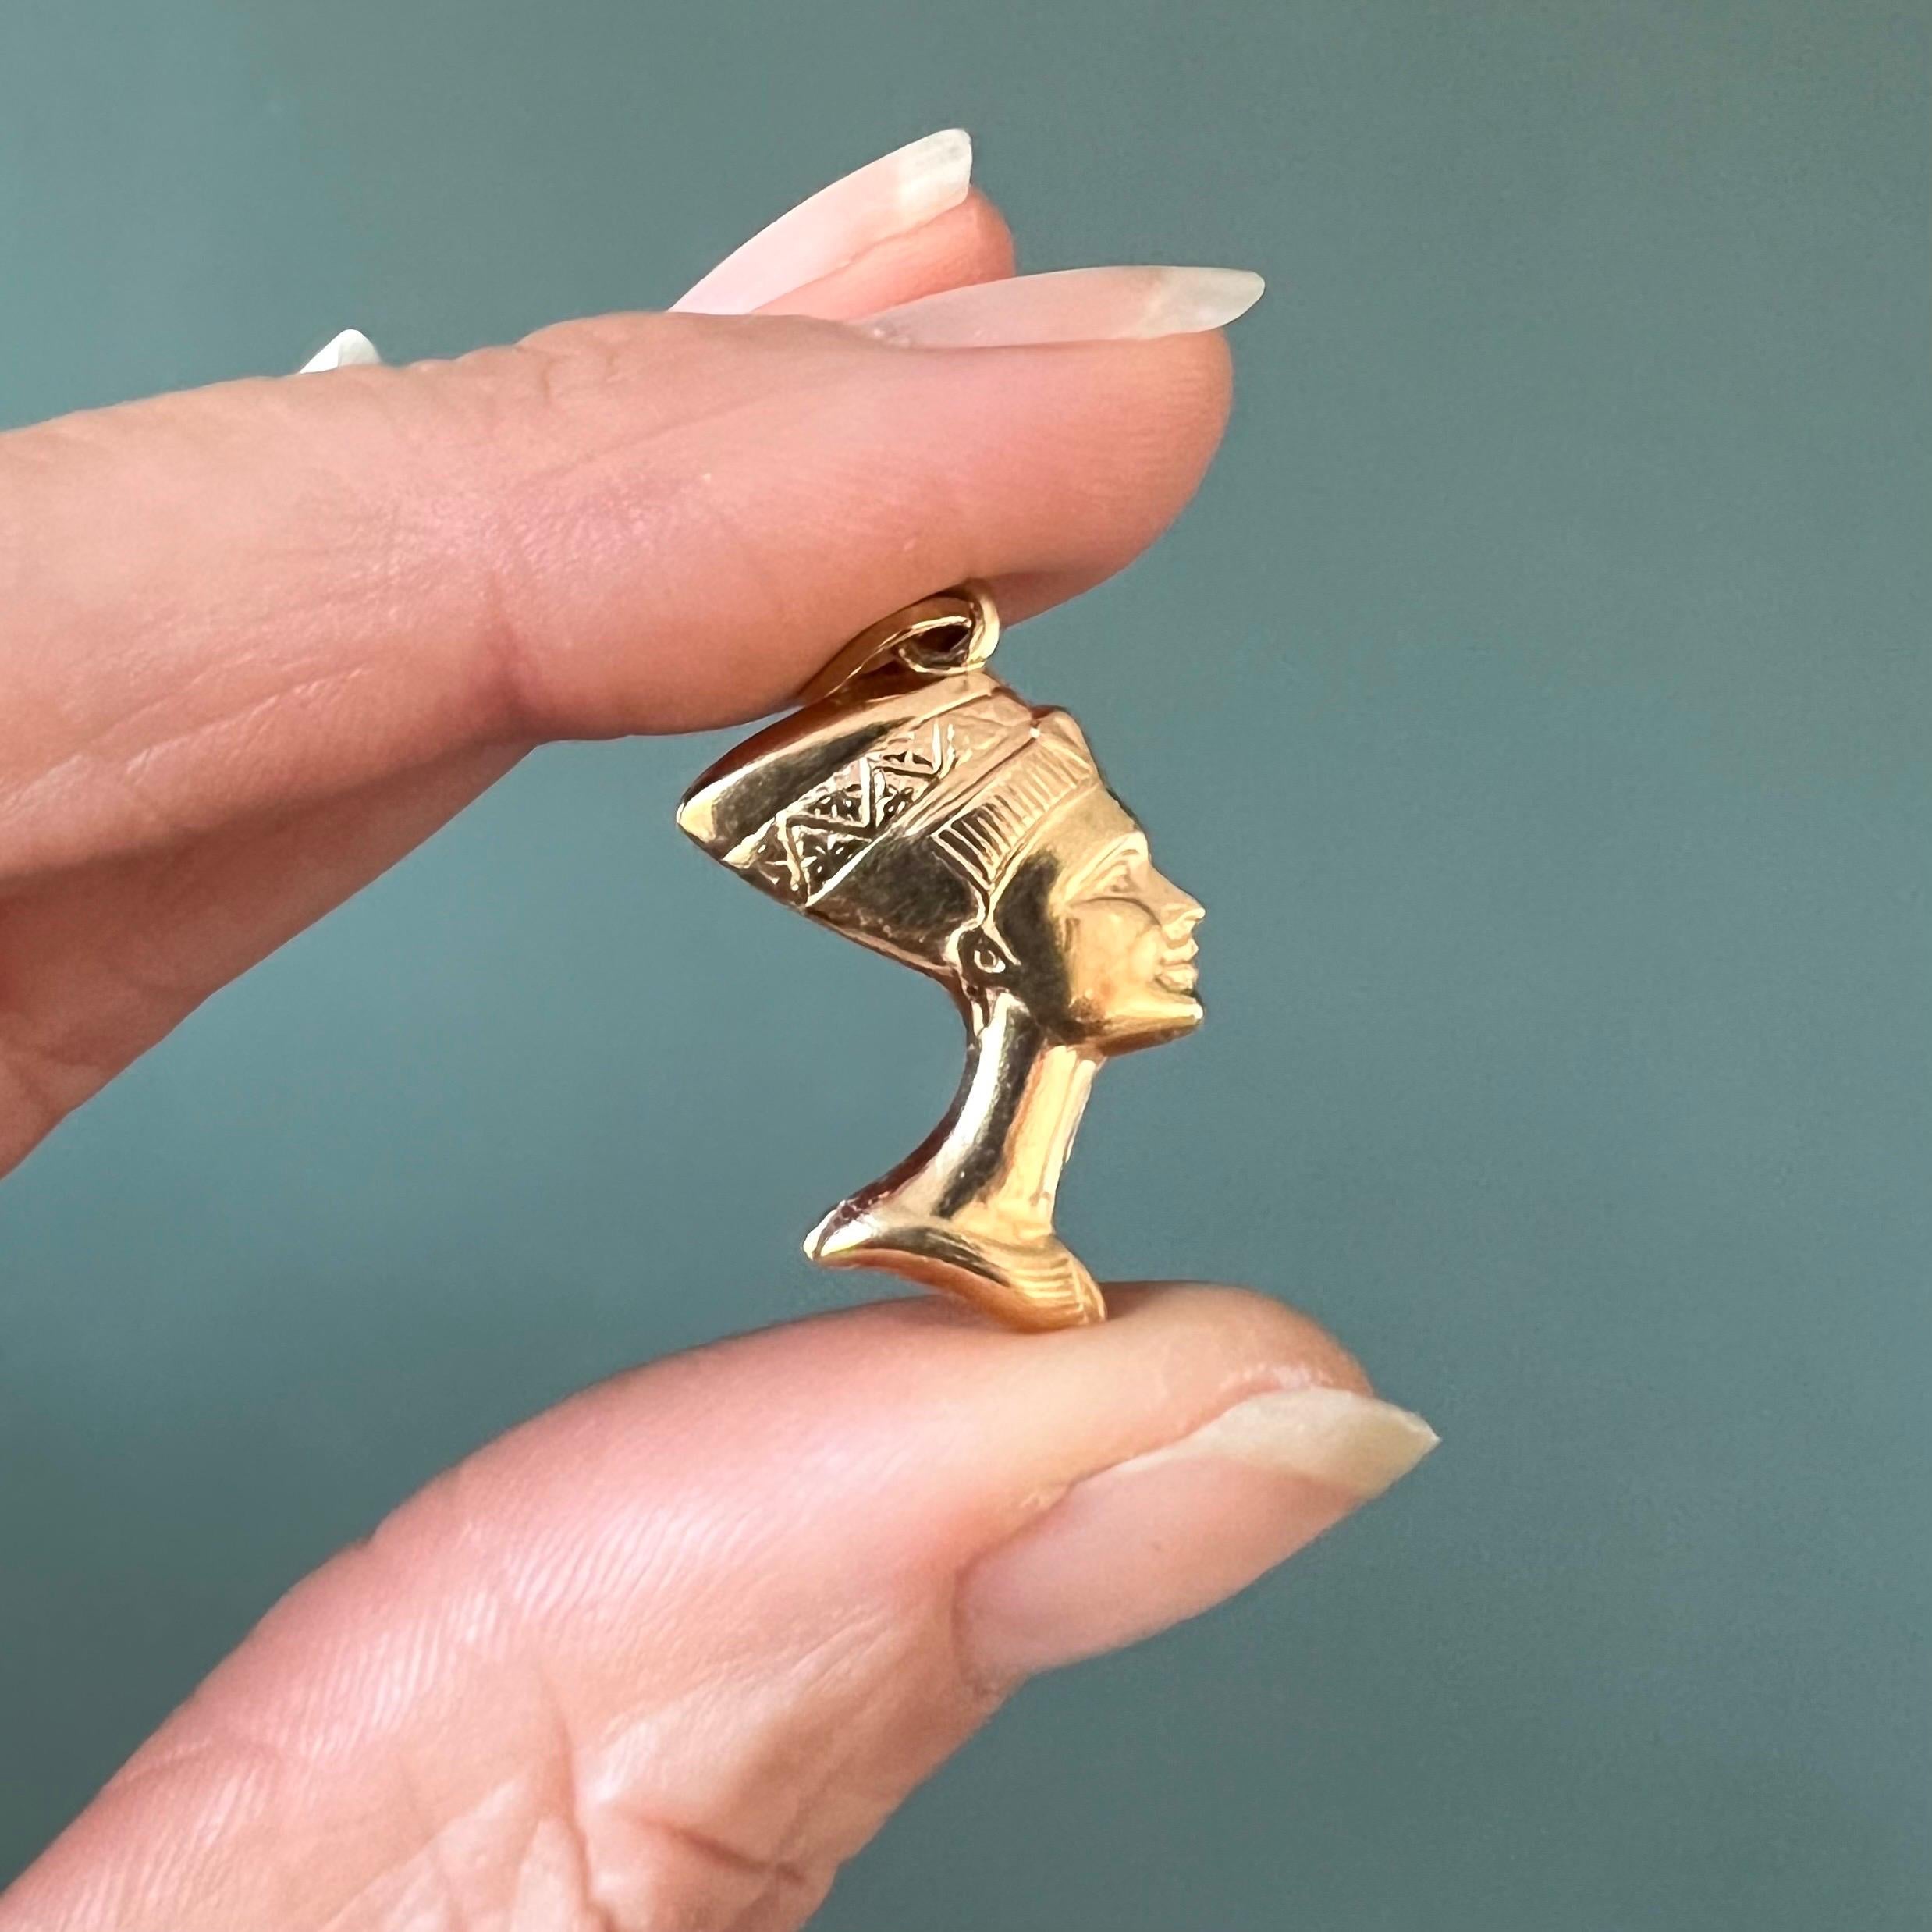 A vintage 14 karat gold Nefertiti bust charm pendant. Nefertiti was - before Cleopatra - one of the most famous and beautiful female rulers of ancient Egypt. This gold queen of the Nile is nicely detailed with her most recognizable bust of her